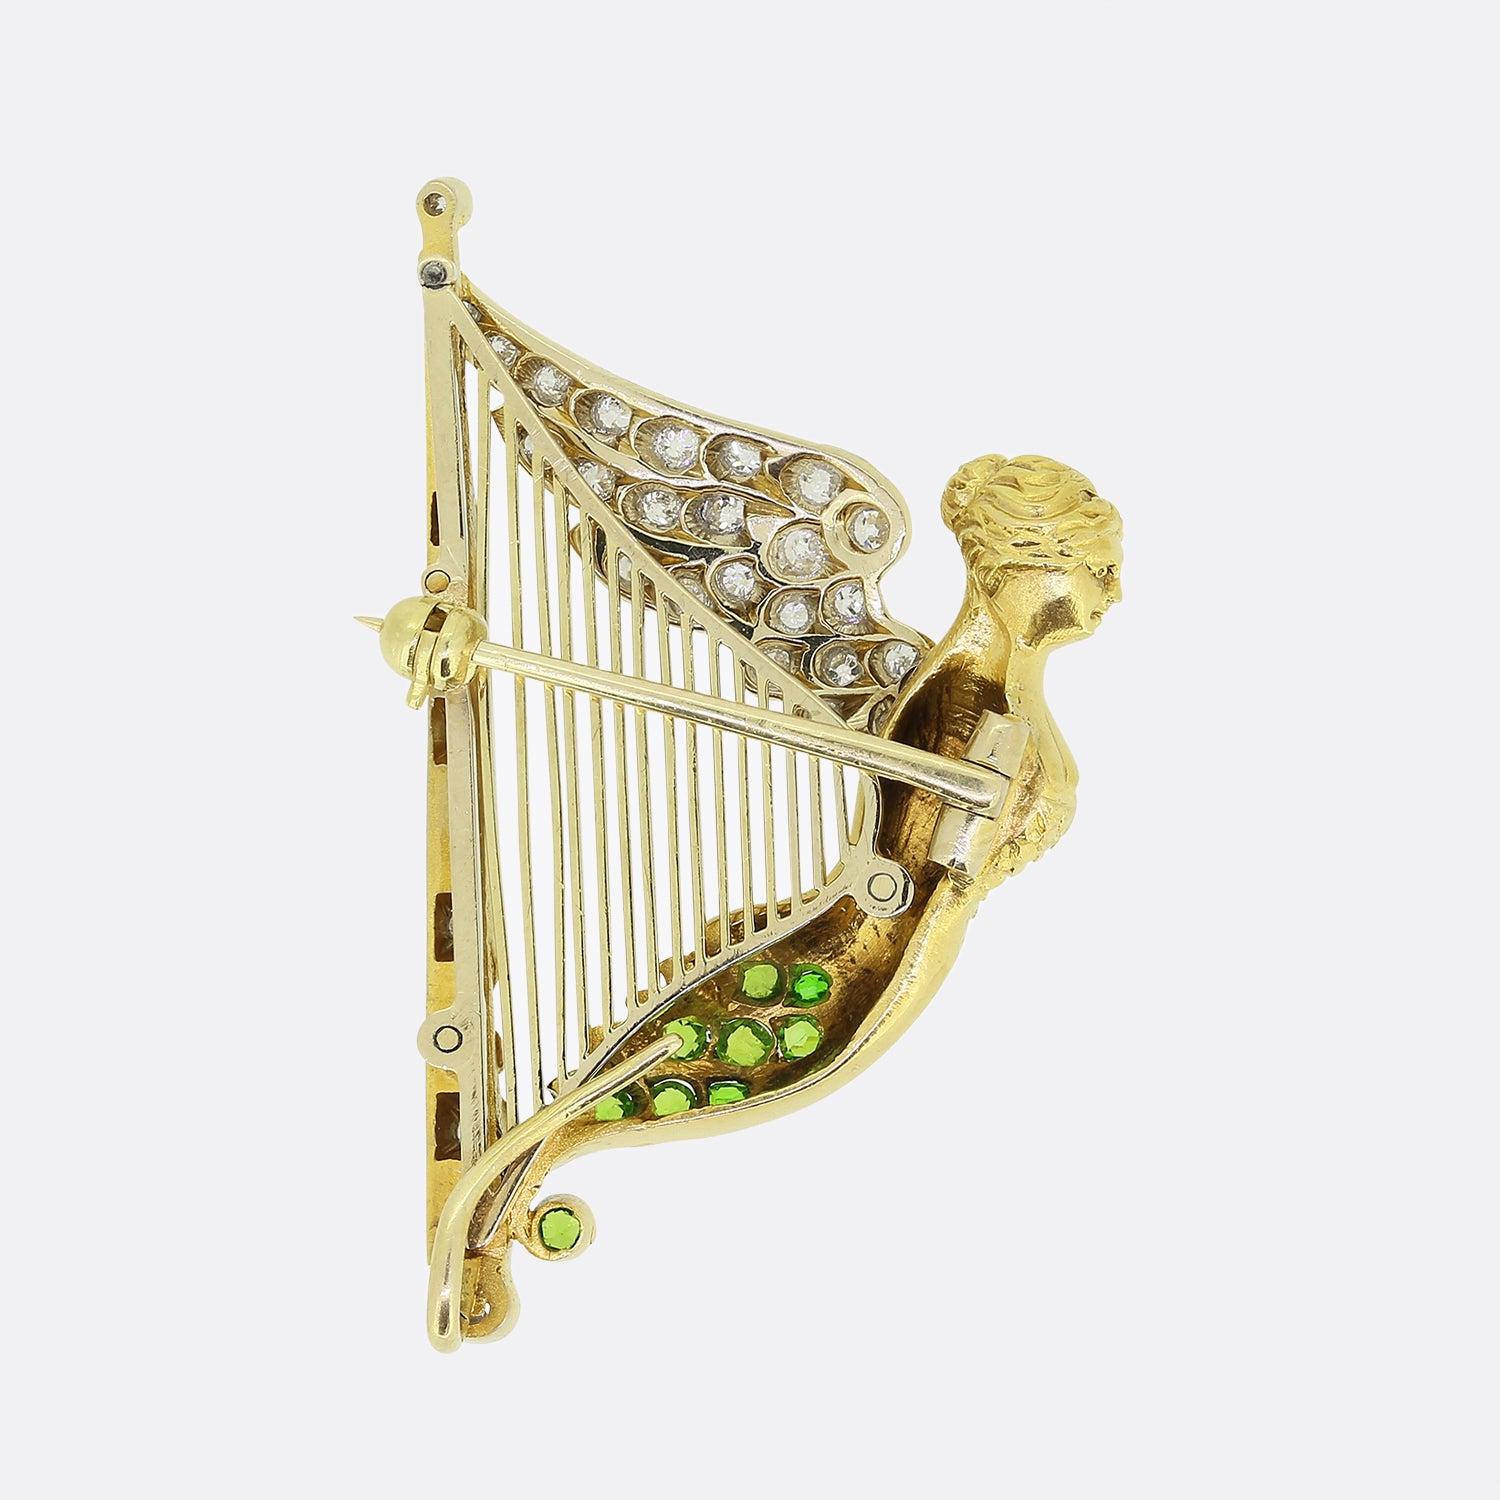 Here we have a wonderfully unique brooch dating back to the Victorian period. This antique piece has been crafted from 15ct yellow gold into the shape of a harp with a female angel portraying the soundbox of this romantic musical instrument.